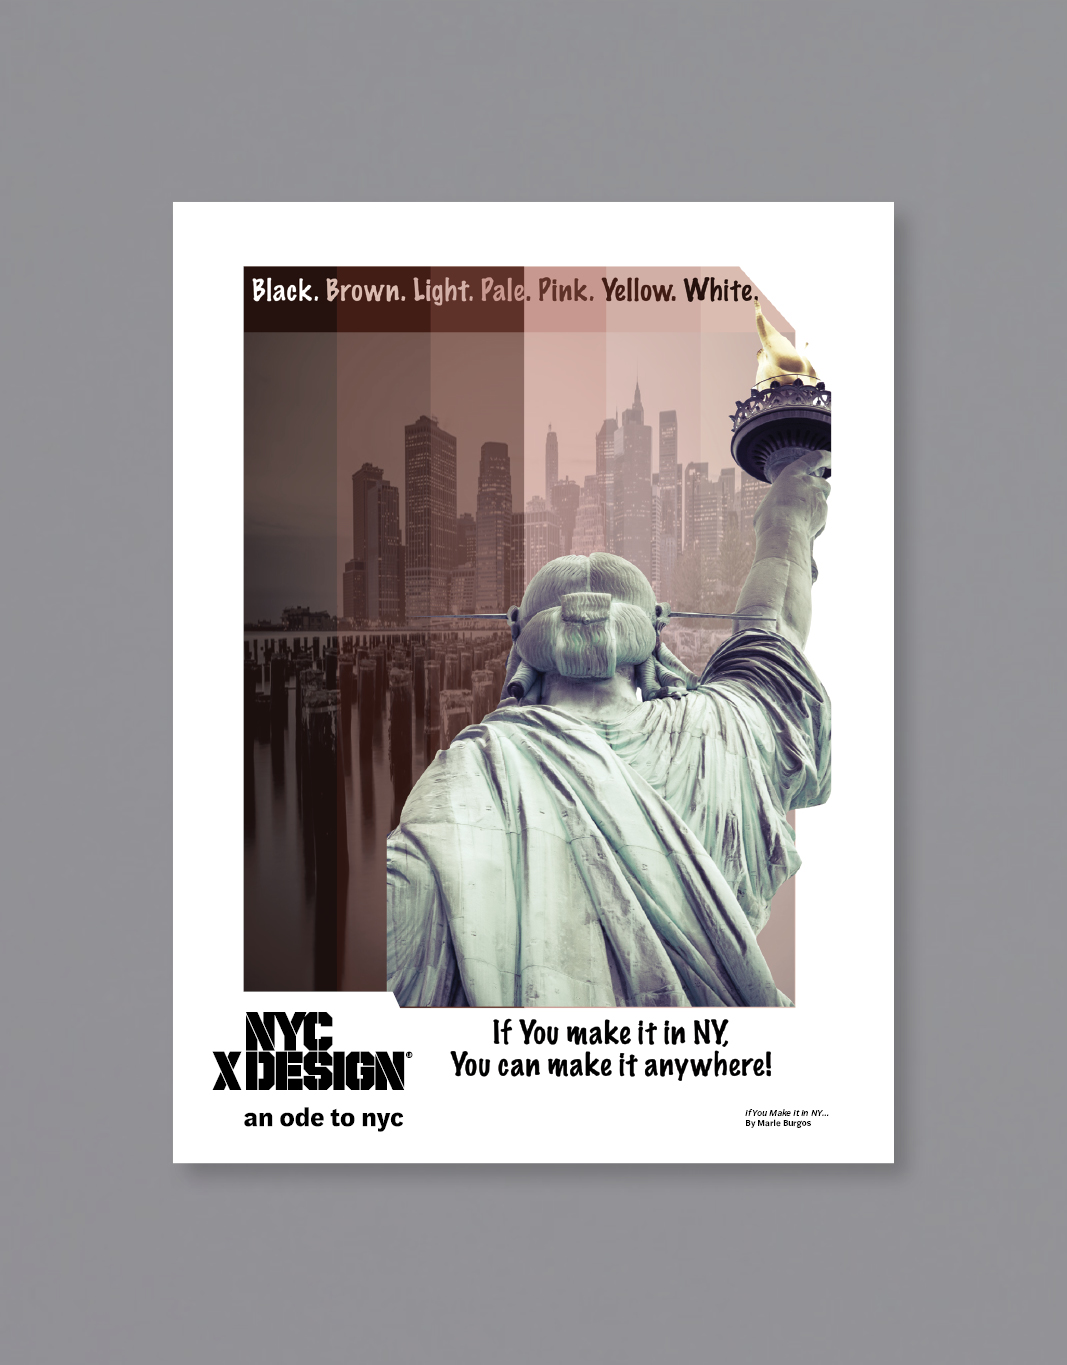 A poster showing the image of the back of the Statue of Liberty. The texts say 